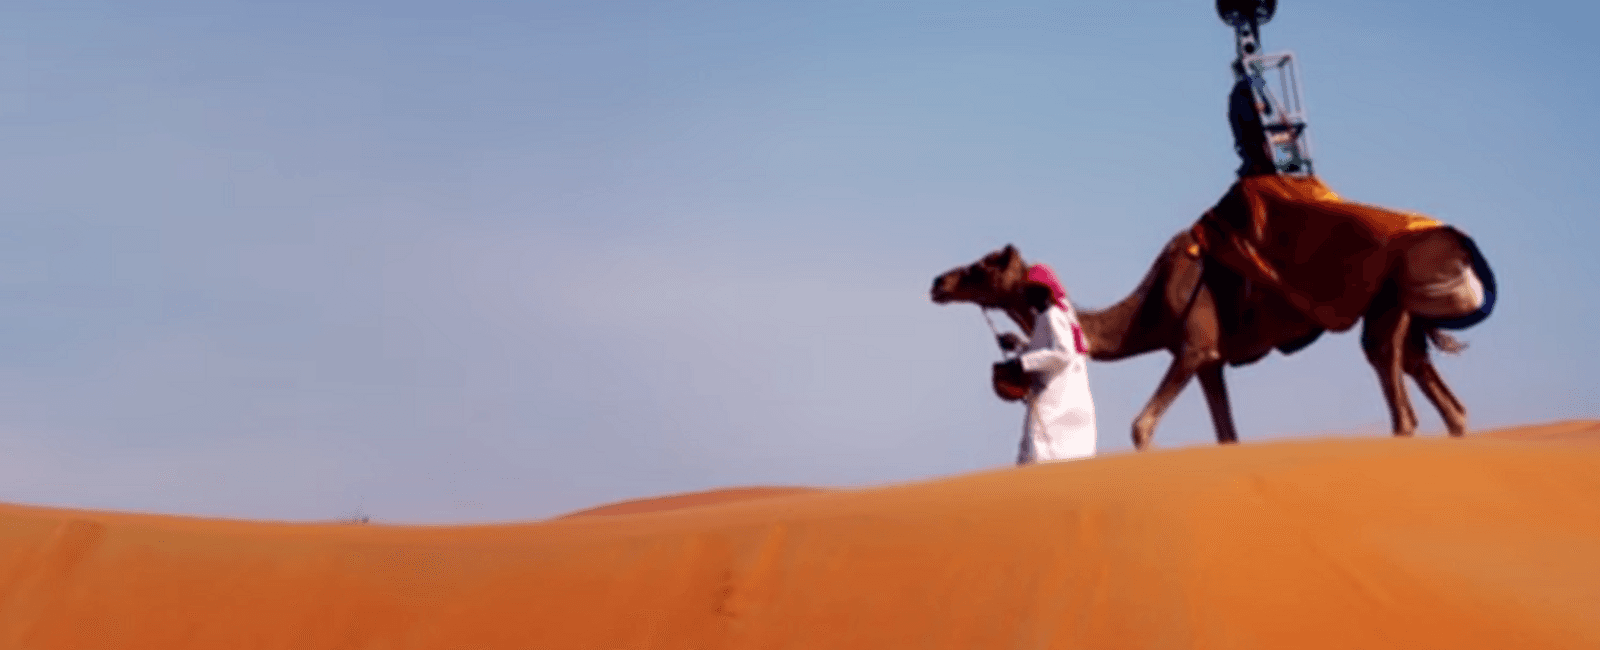 Google once hired a camel to capture street views in the desert